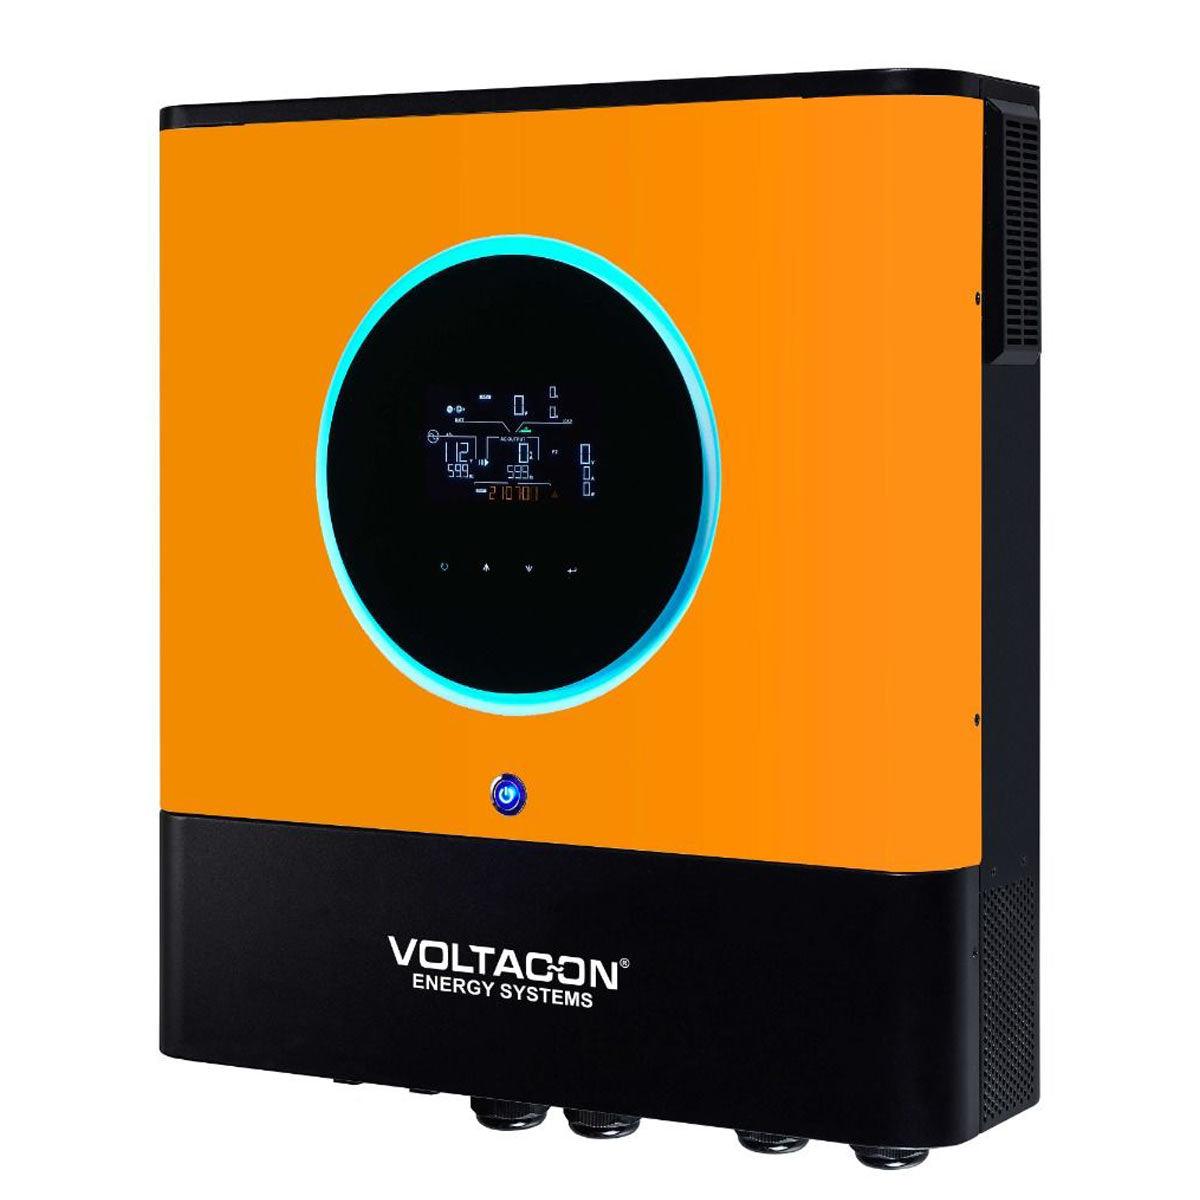 Conversol Max-II 8kW Off Grid Inverter / Charger With Time Charging - 150A MPPT - VoltaconSolar